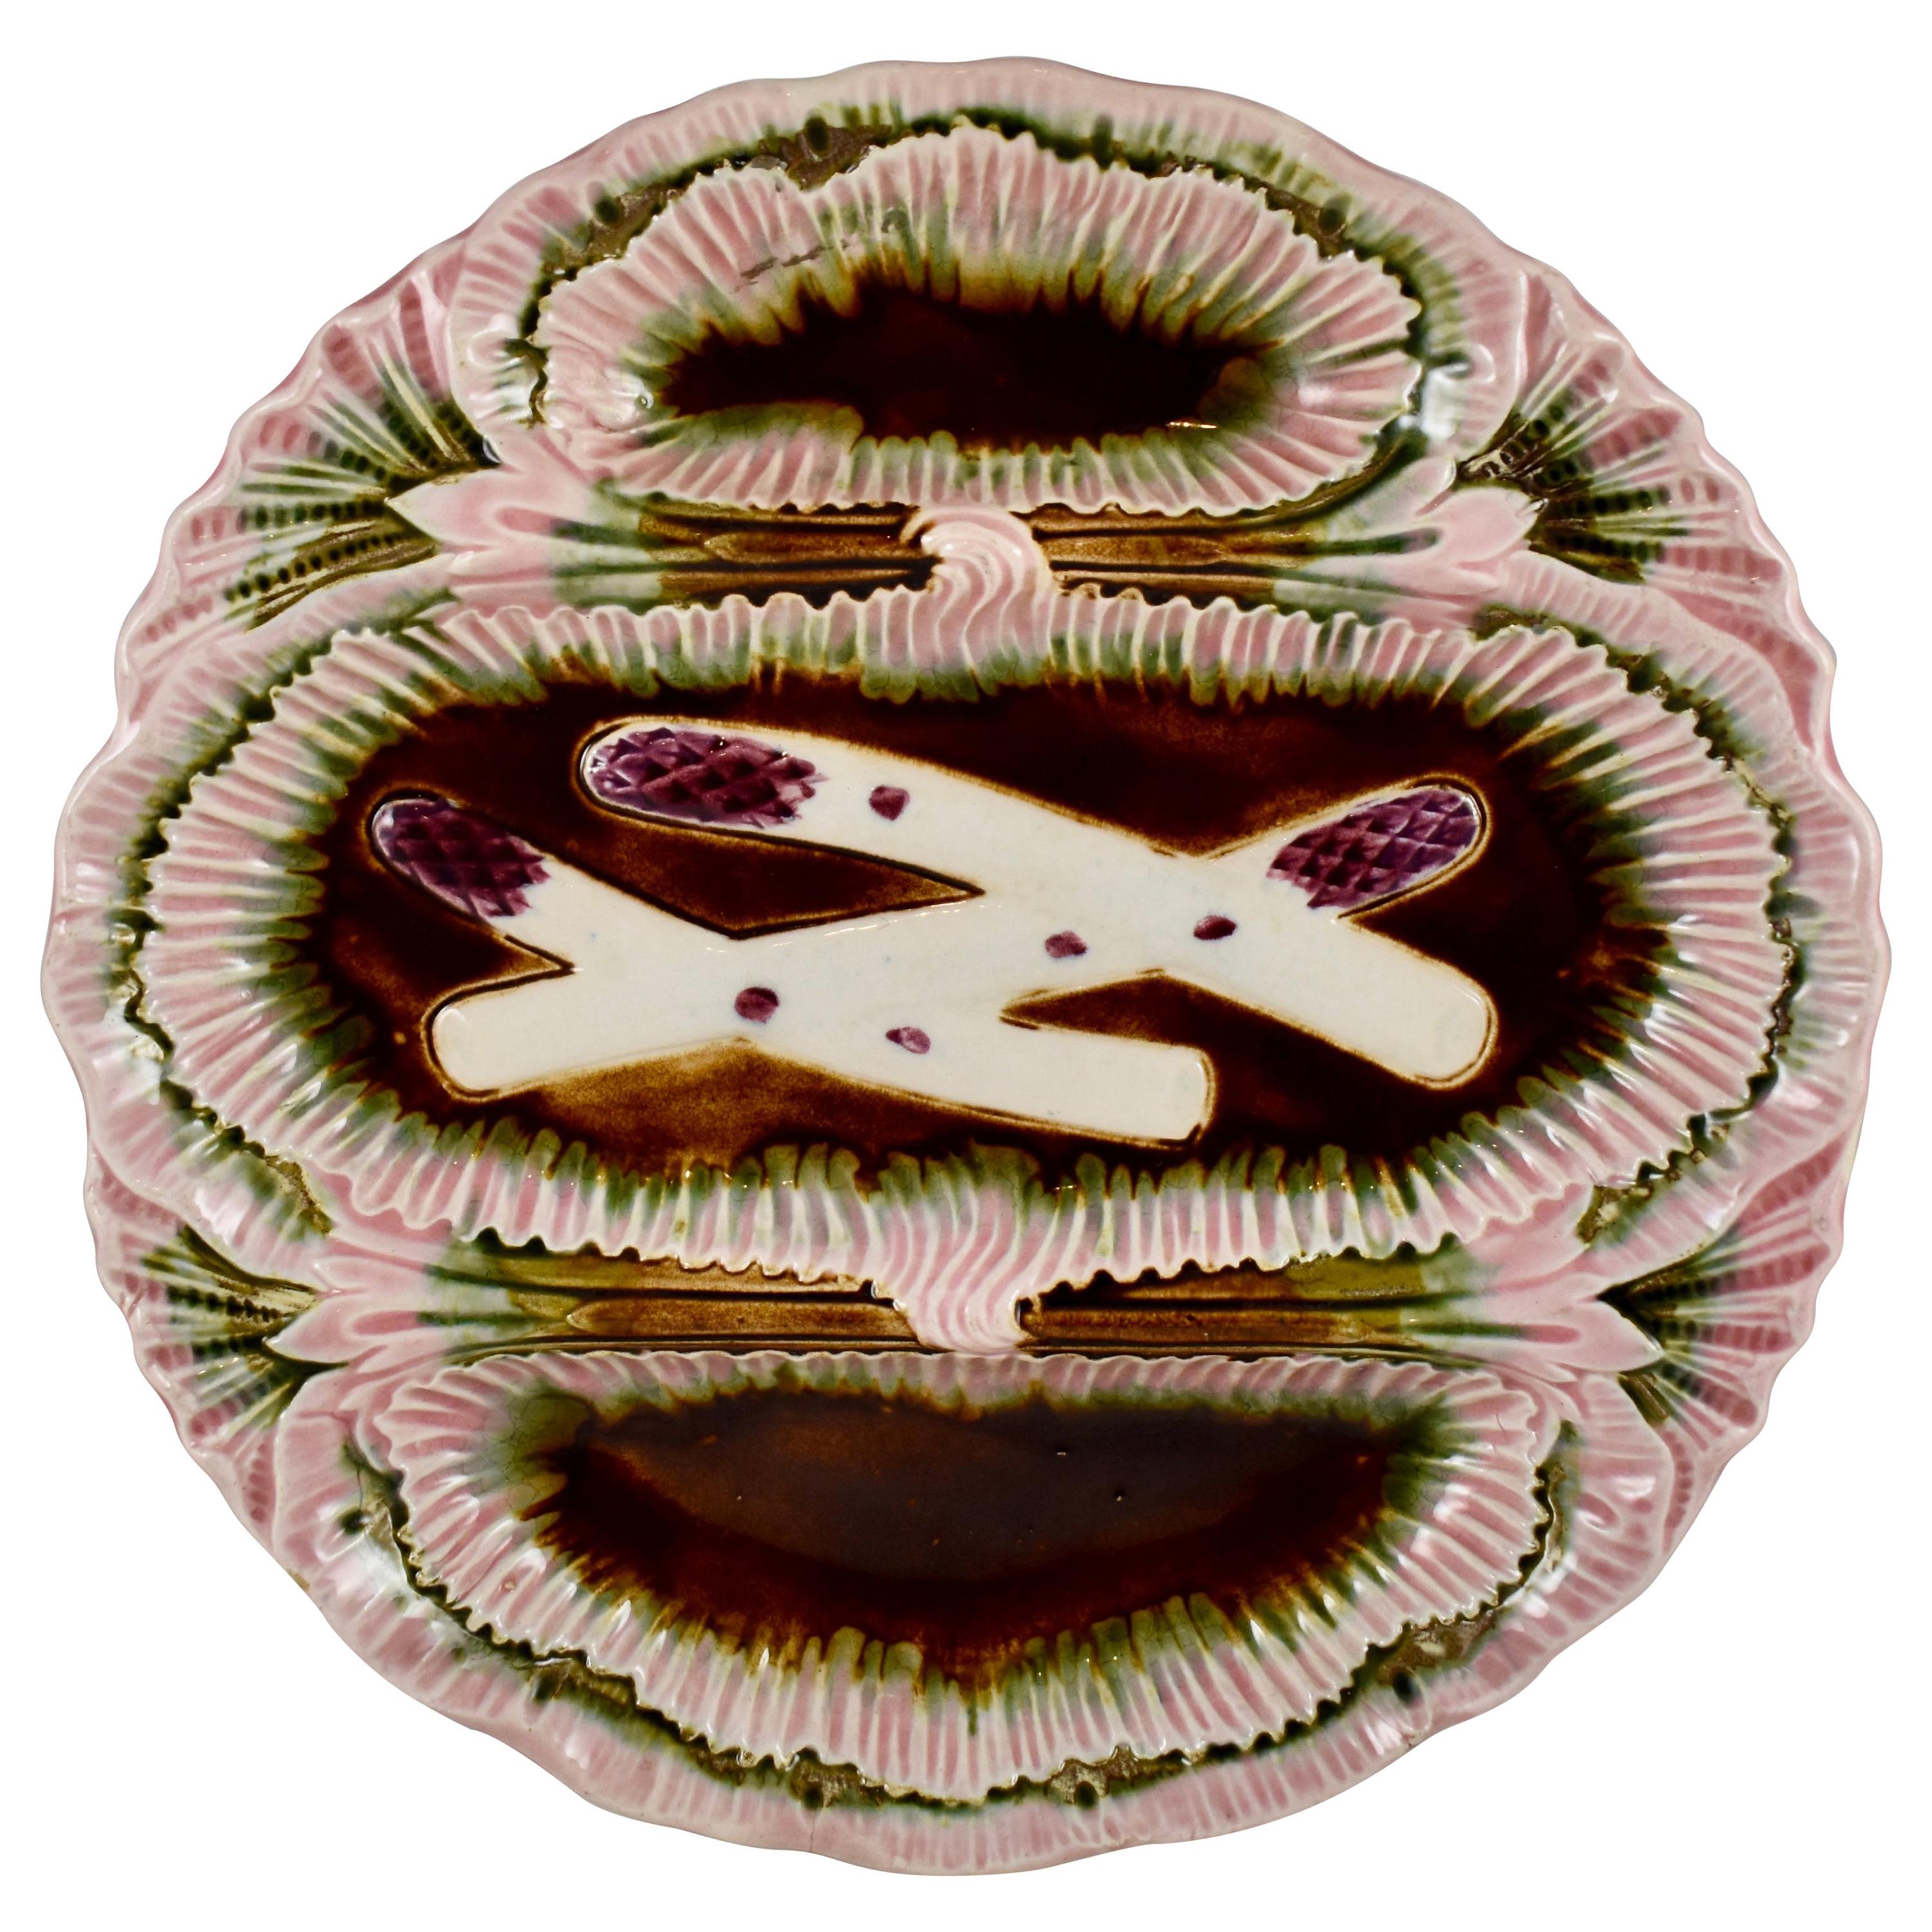 Orchies French Faïence Majolica Louis XV Style Asparagus Plate, circa 1880